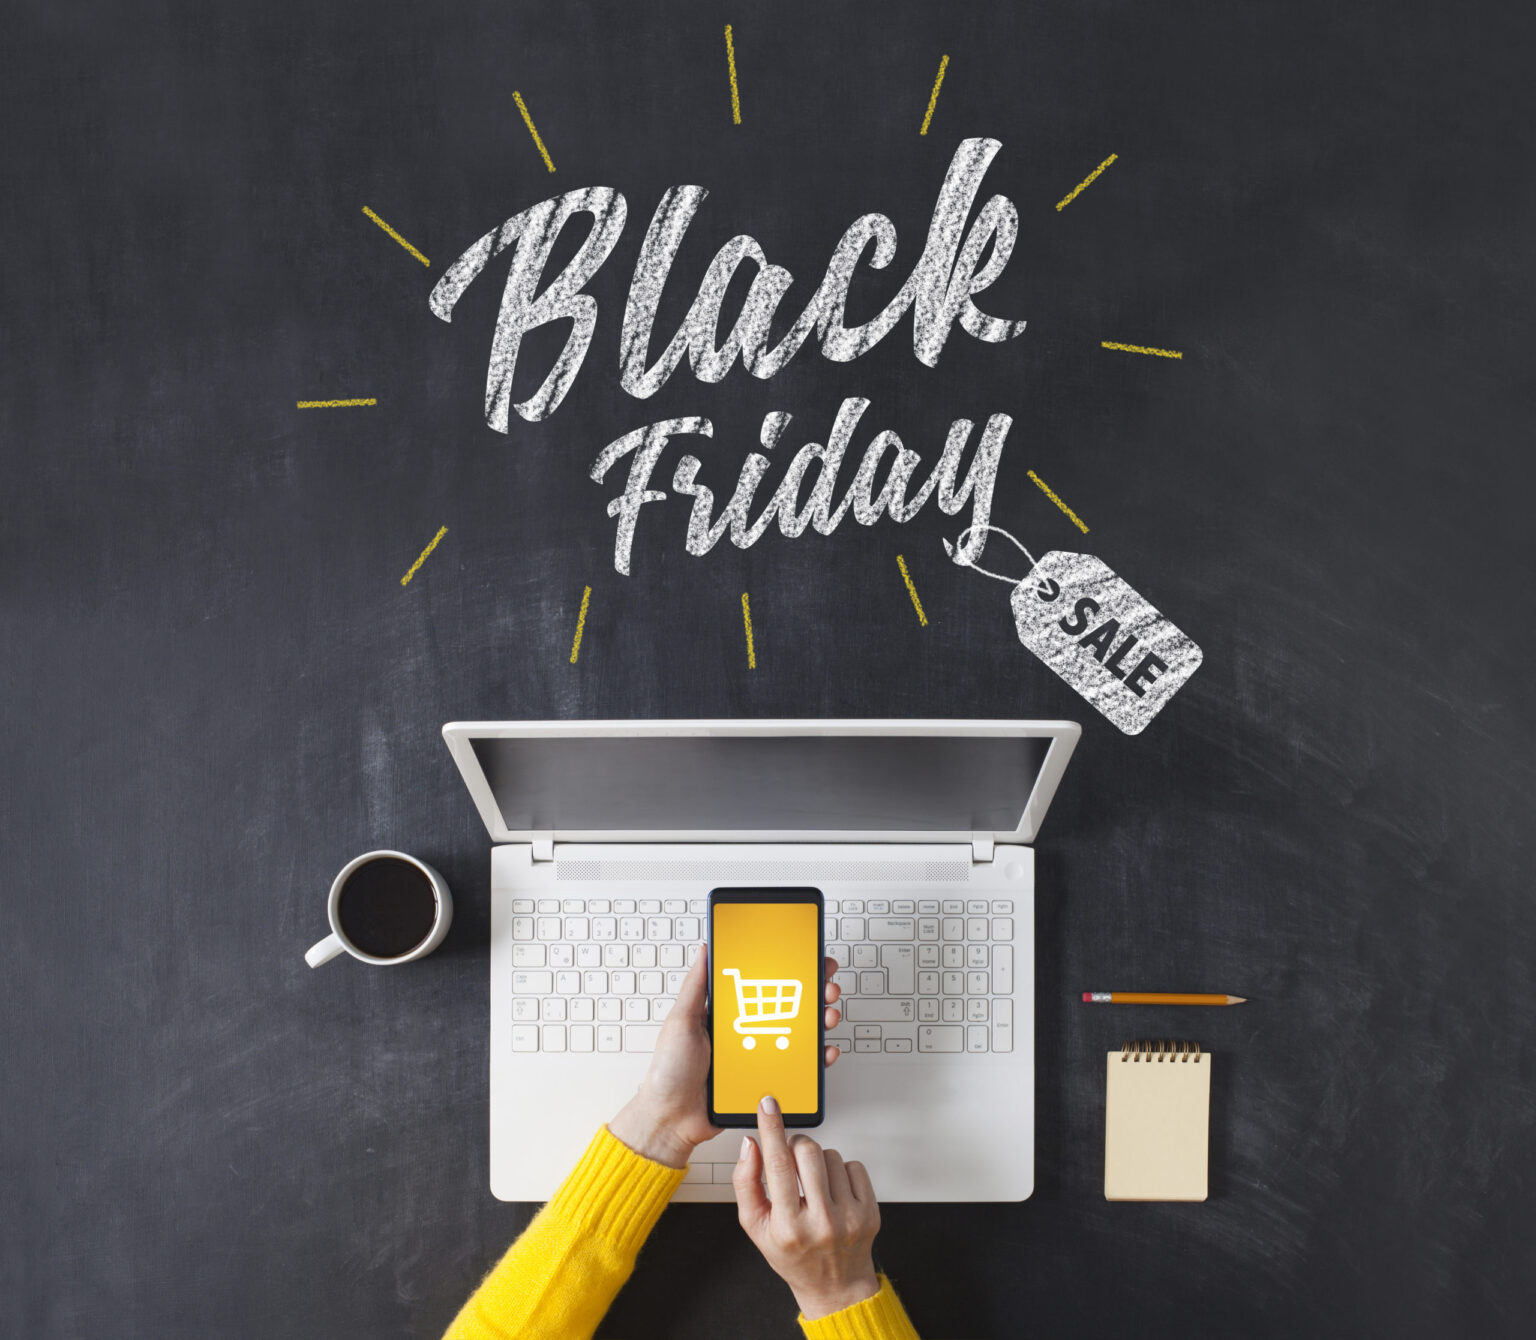 Black friday advertisement on blackboard. Woman shopping with smart phone app. Online e-commerce shopping concept.